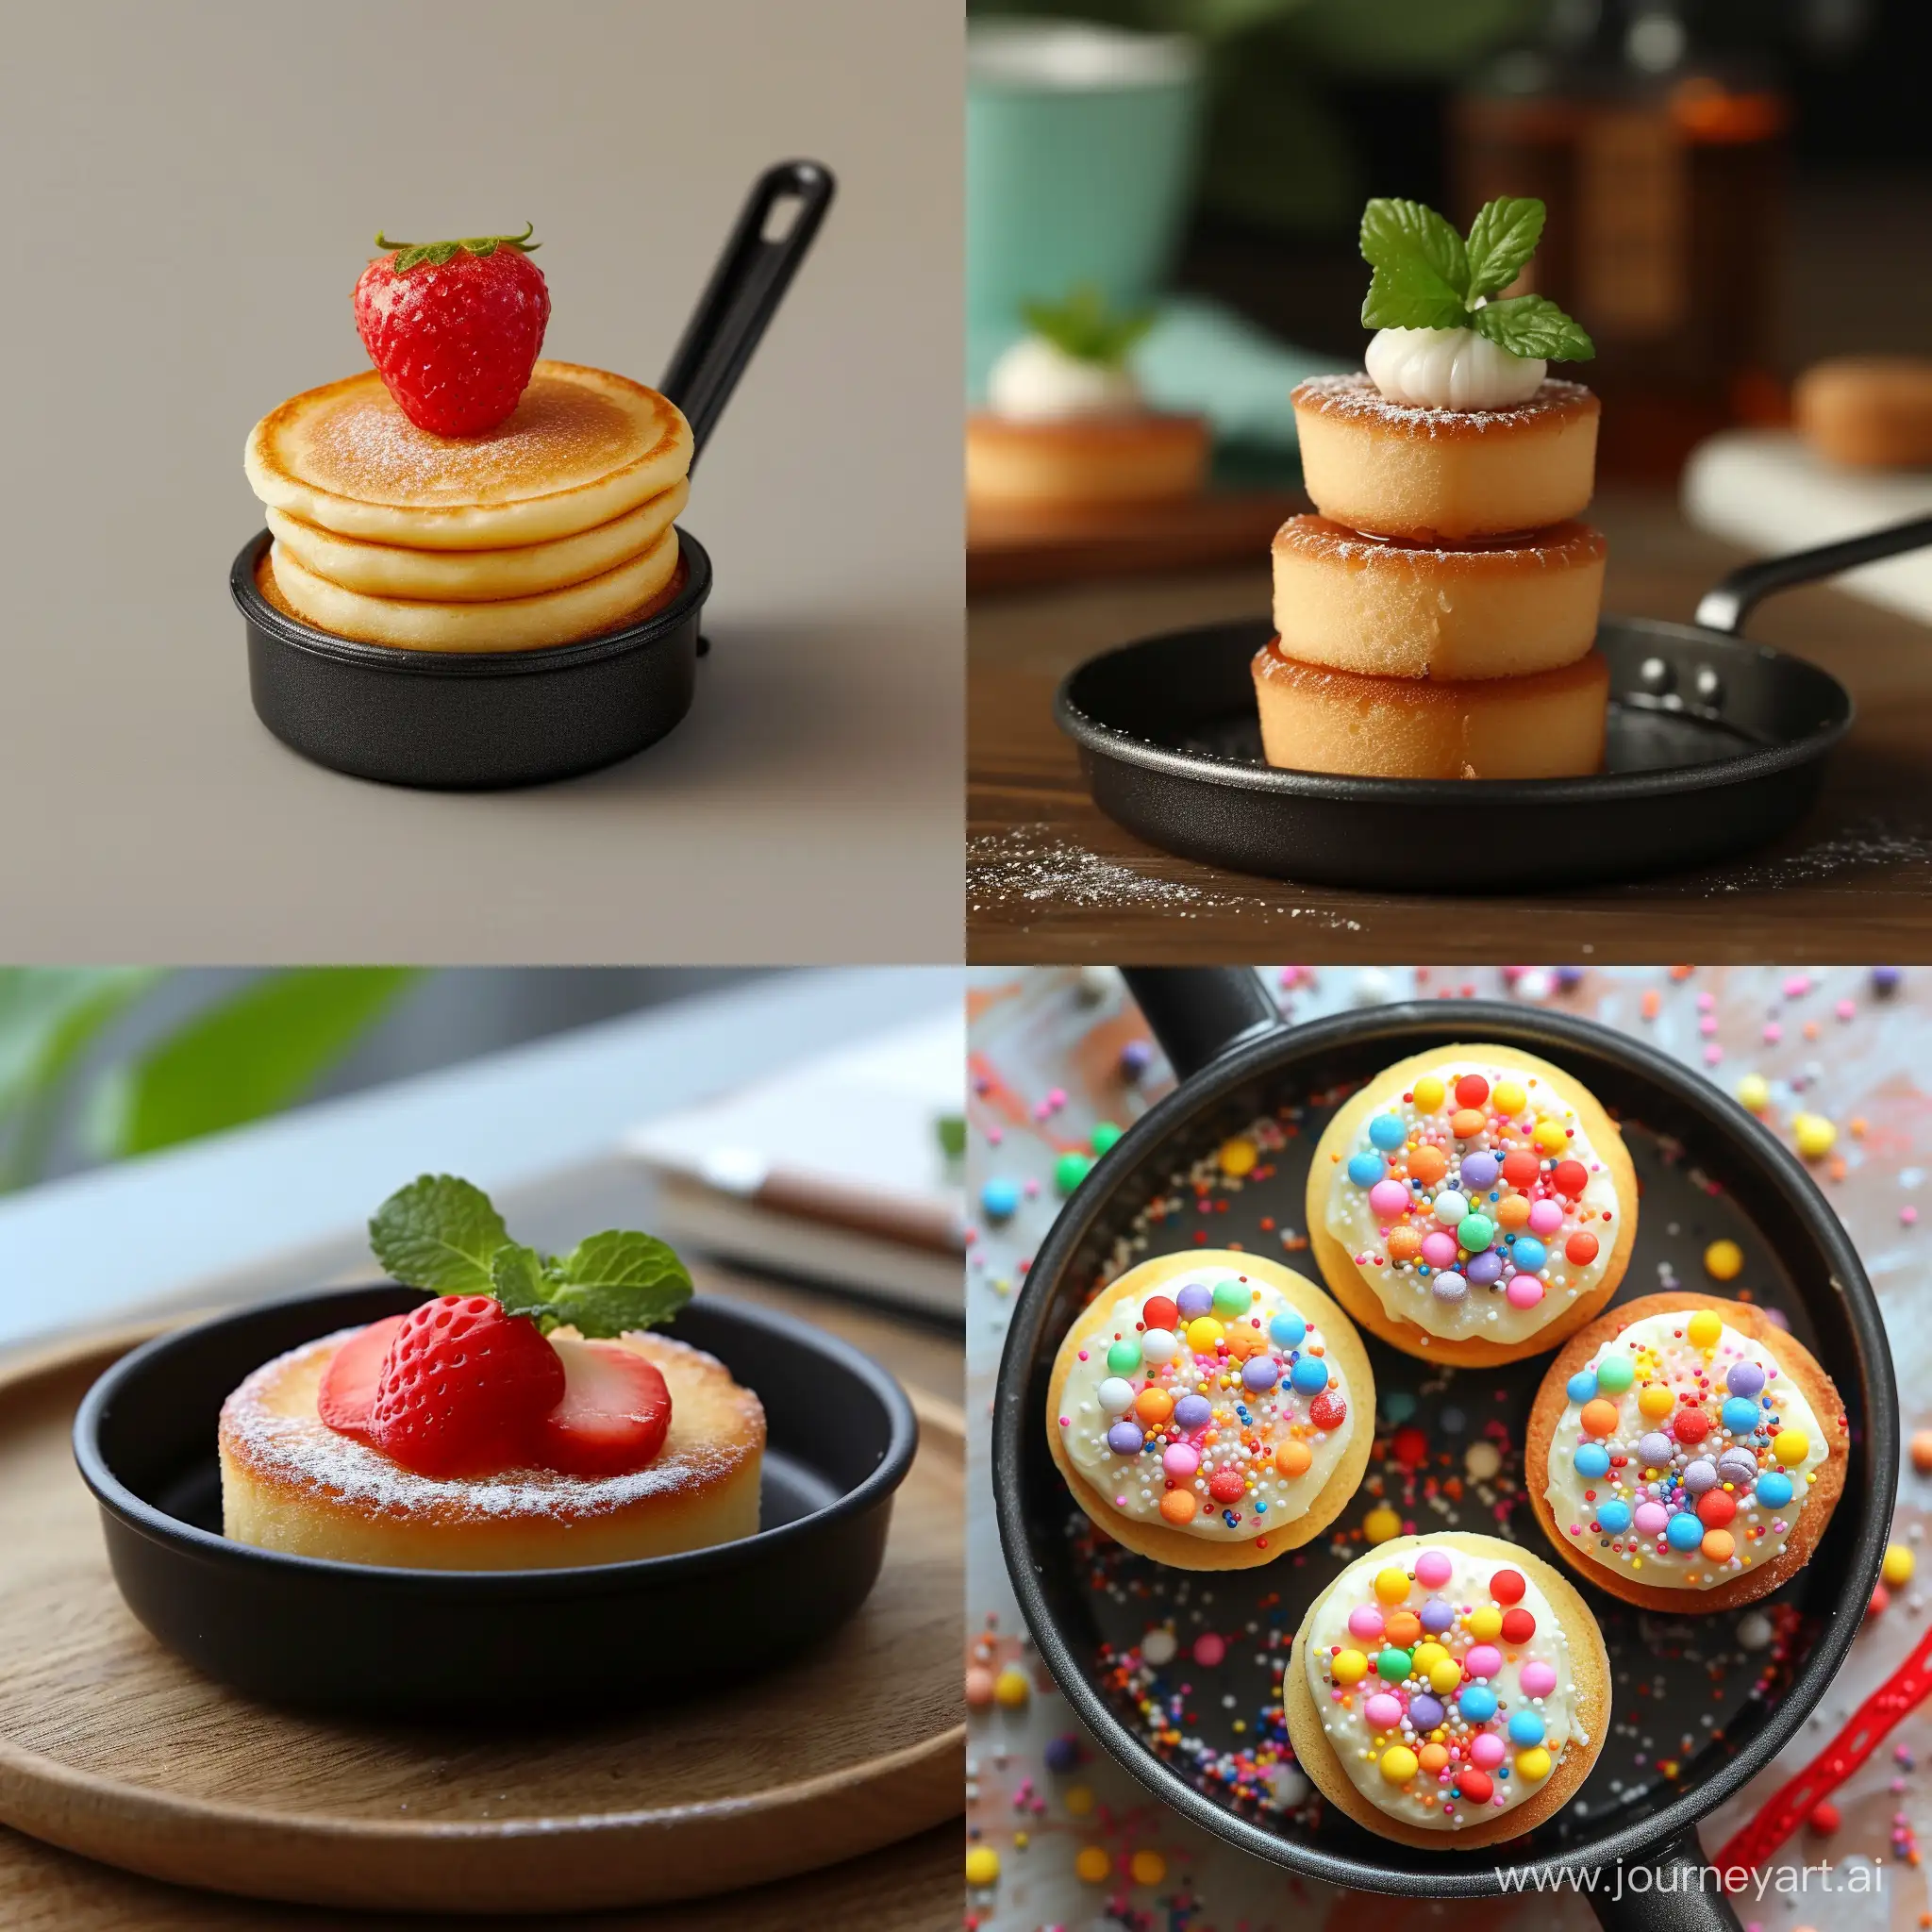 Delicious-Mini-Pancakes-Served-on-a-Vibrant-Plate